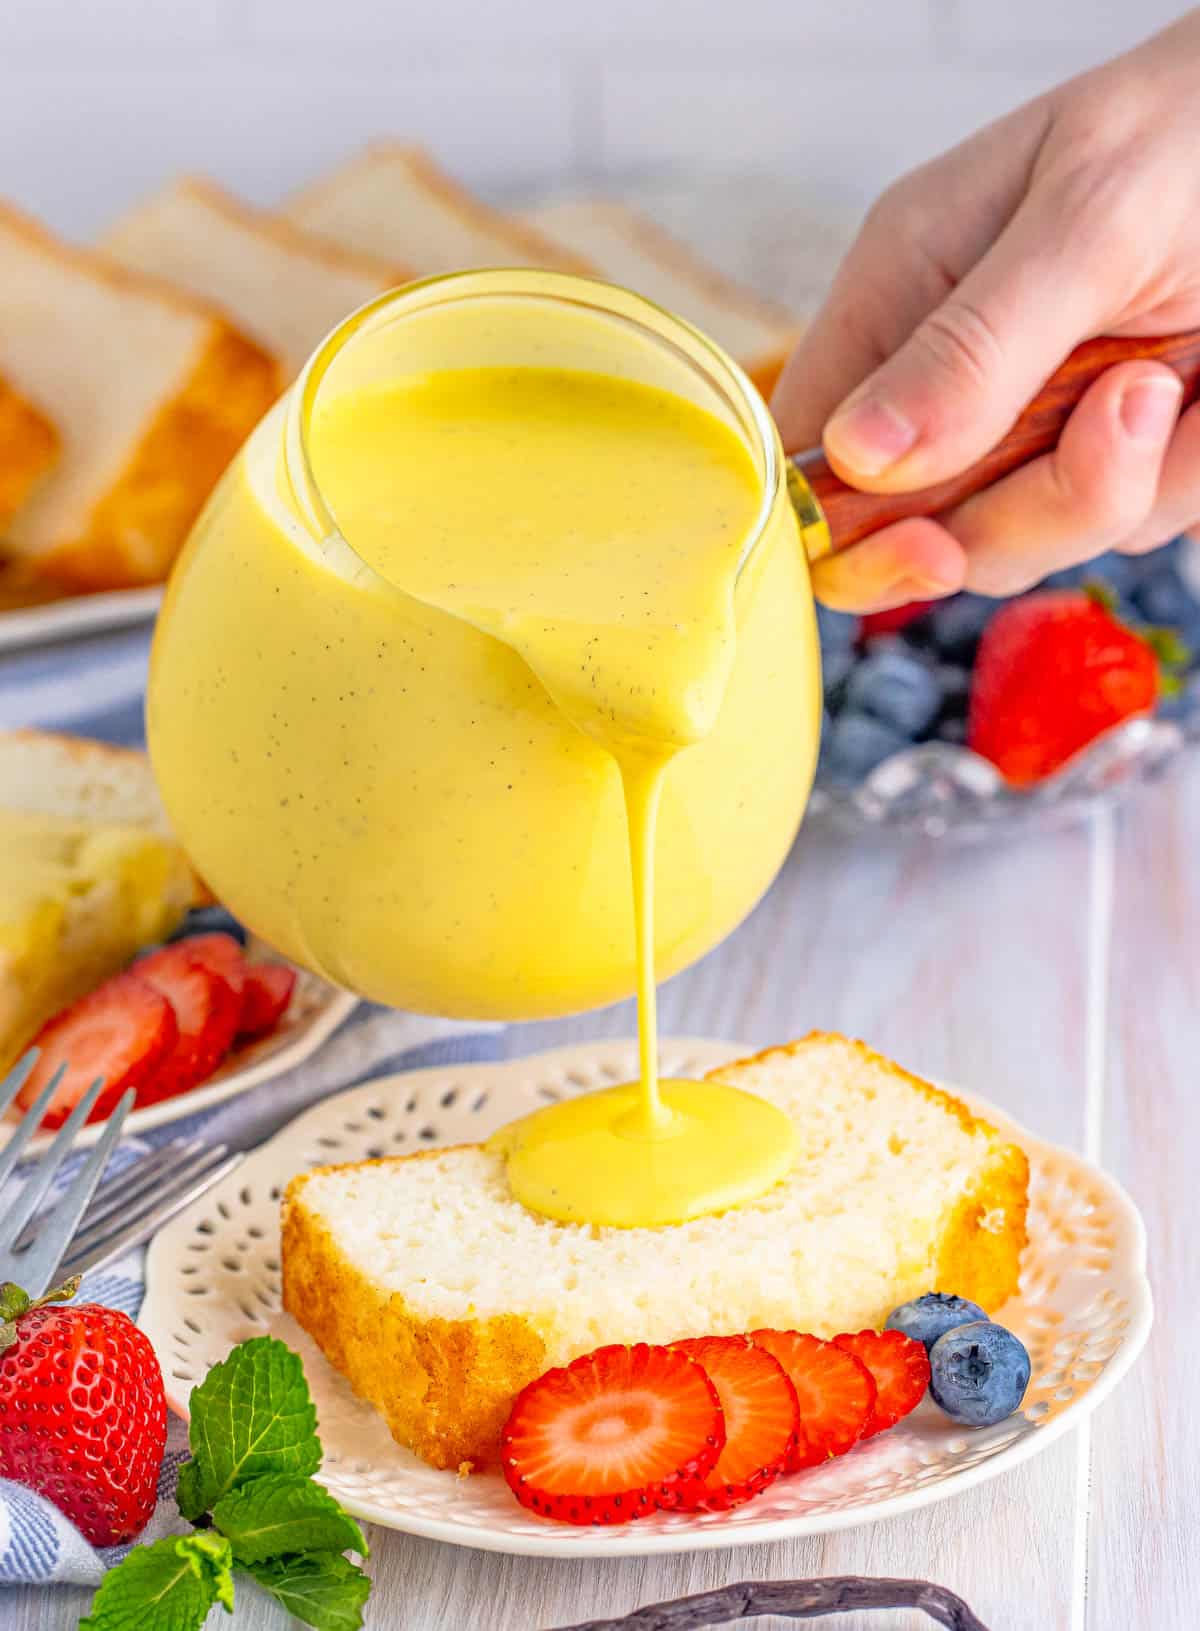 Crème Anglaise being poured over a slice of angel food cake on plate with fruit.